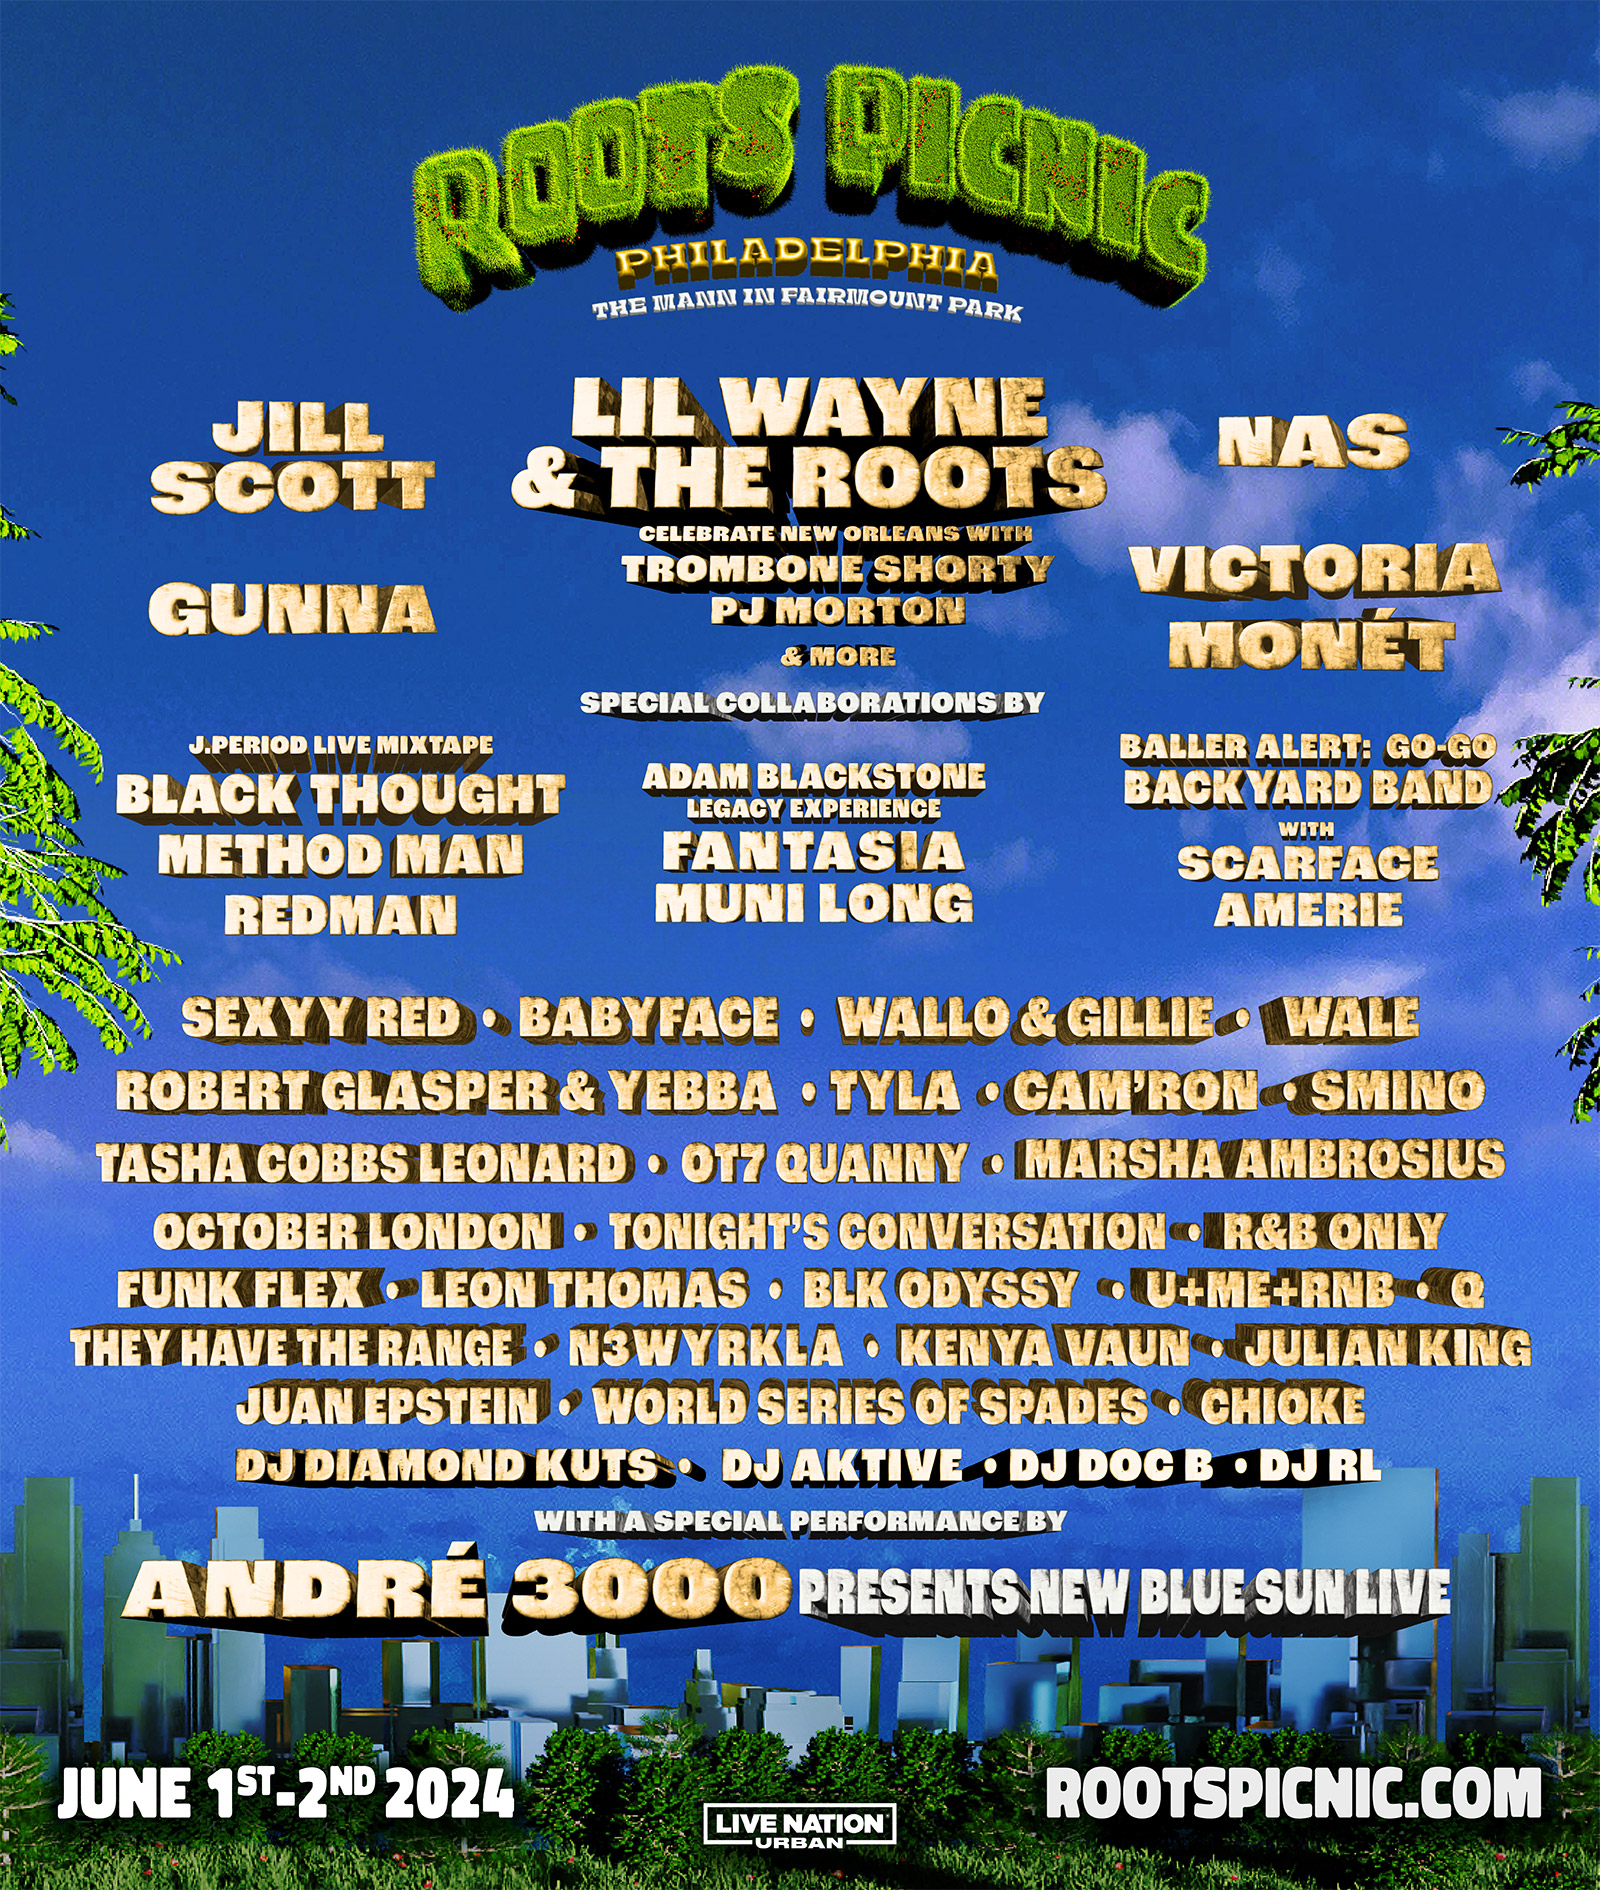 Roots Picnic 2024 update